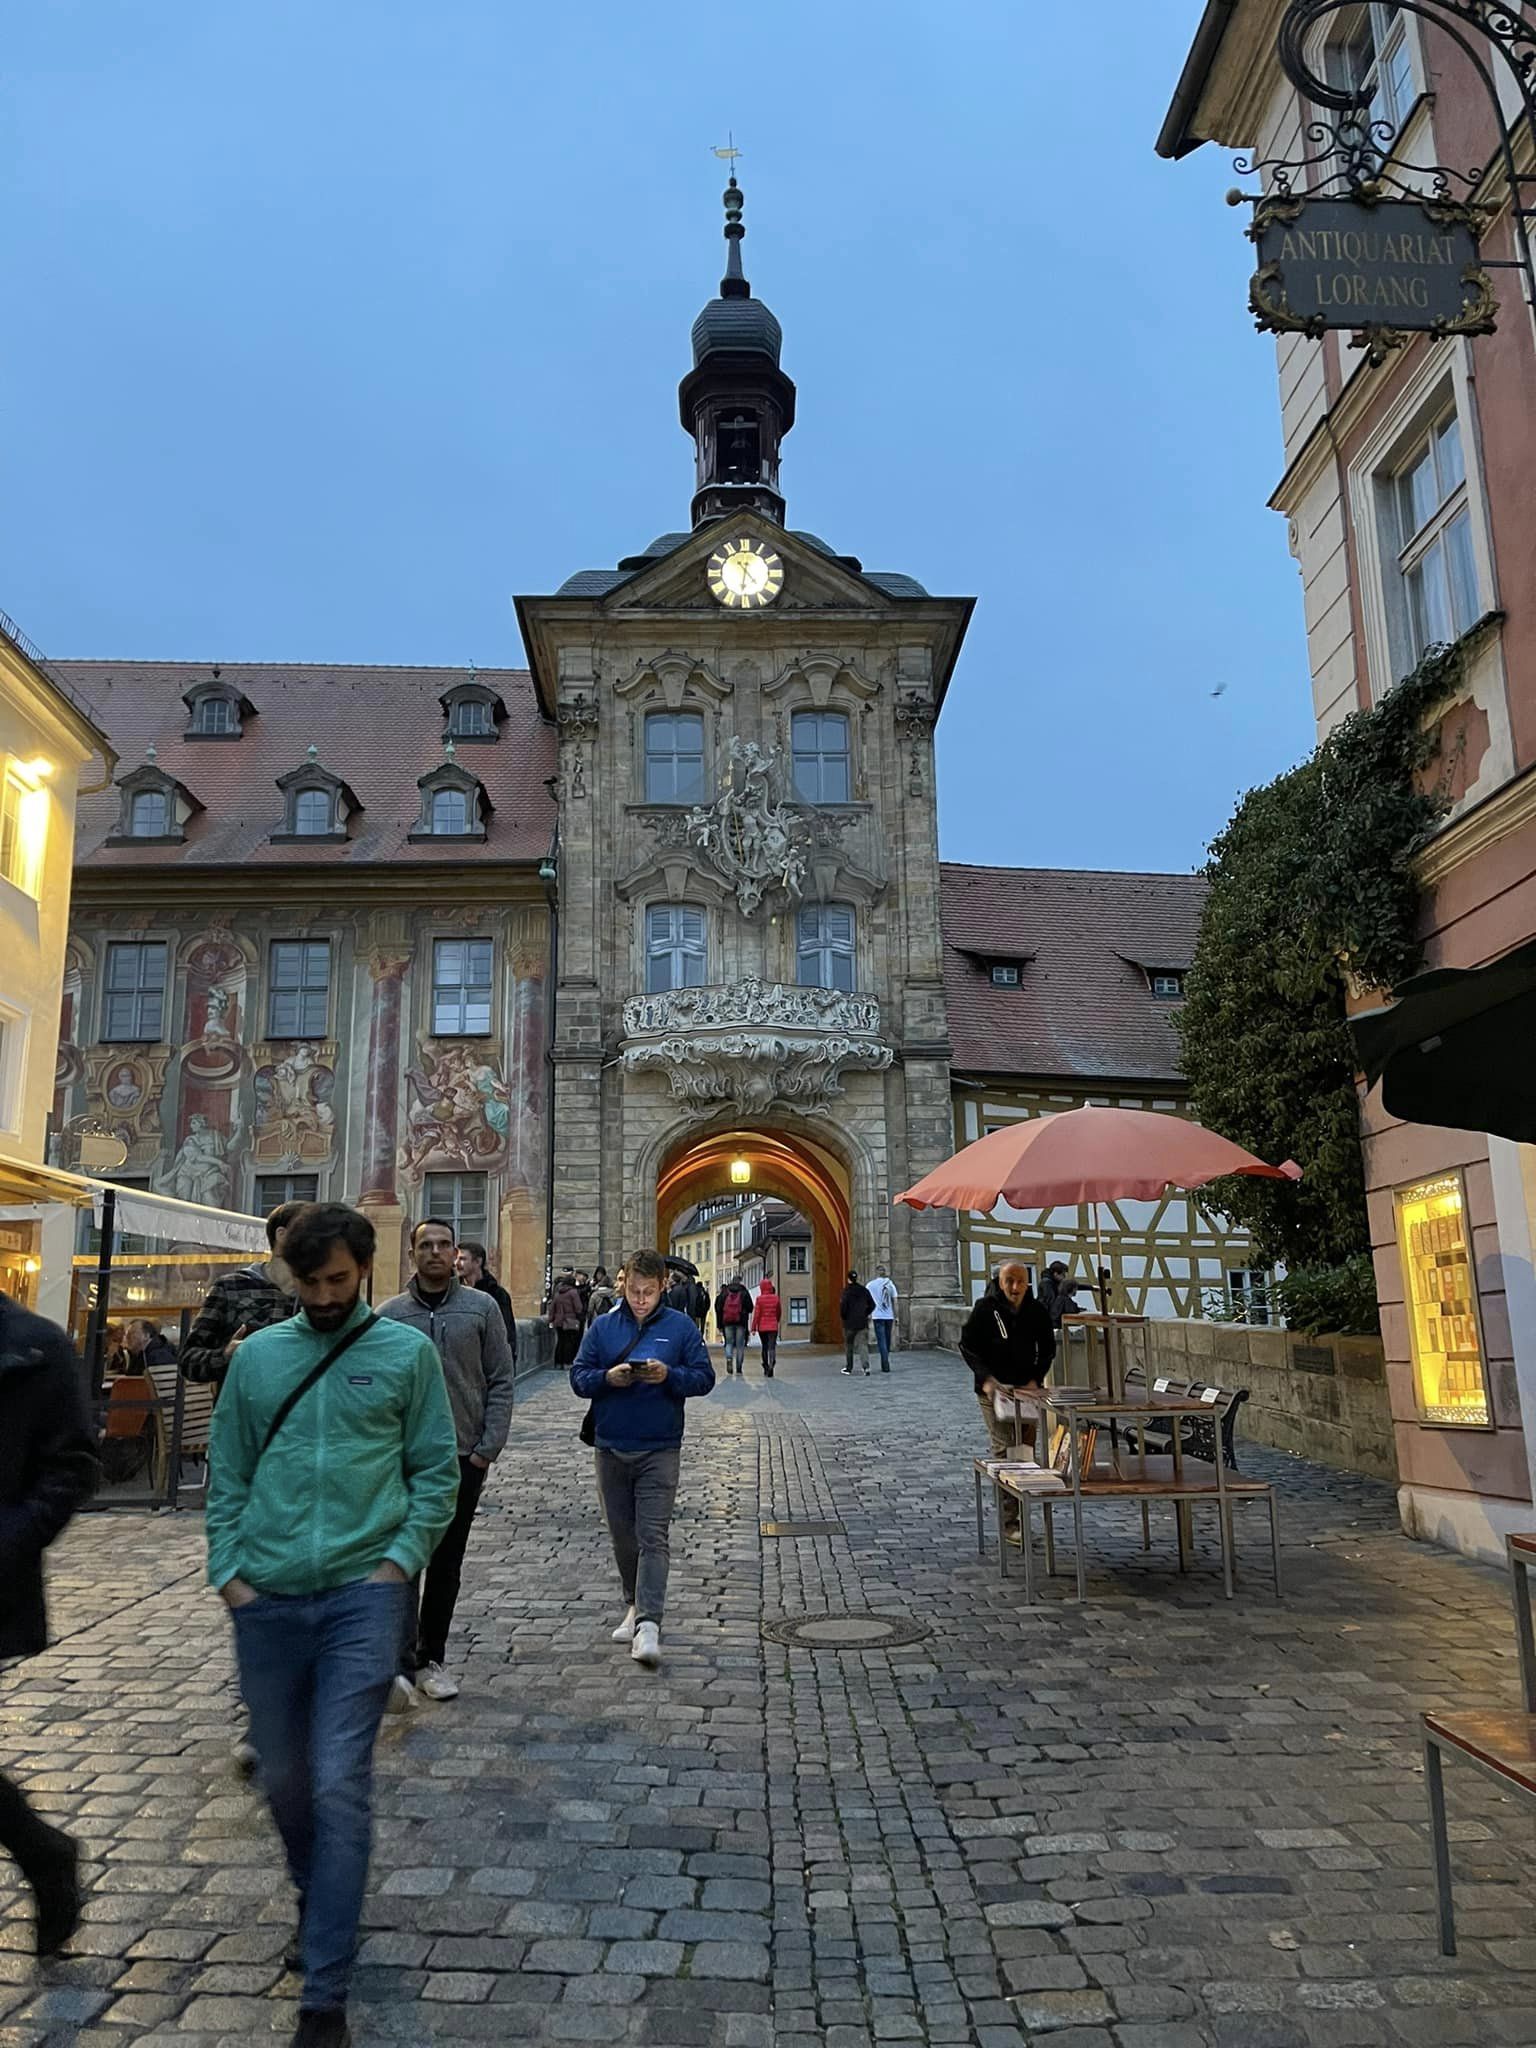 Twilight view of the Altes Rathaus with its baroque façade, ornate clock tower, and a stone archway, on a cobblestone street with pedestrians and outdoor café tables in Germany.